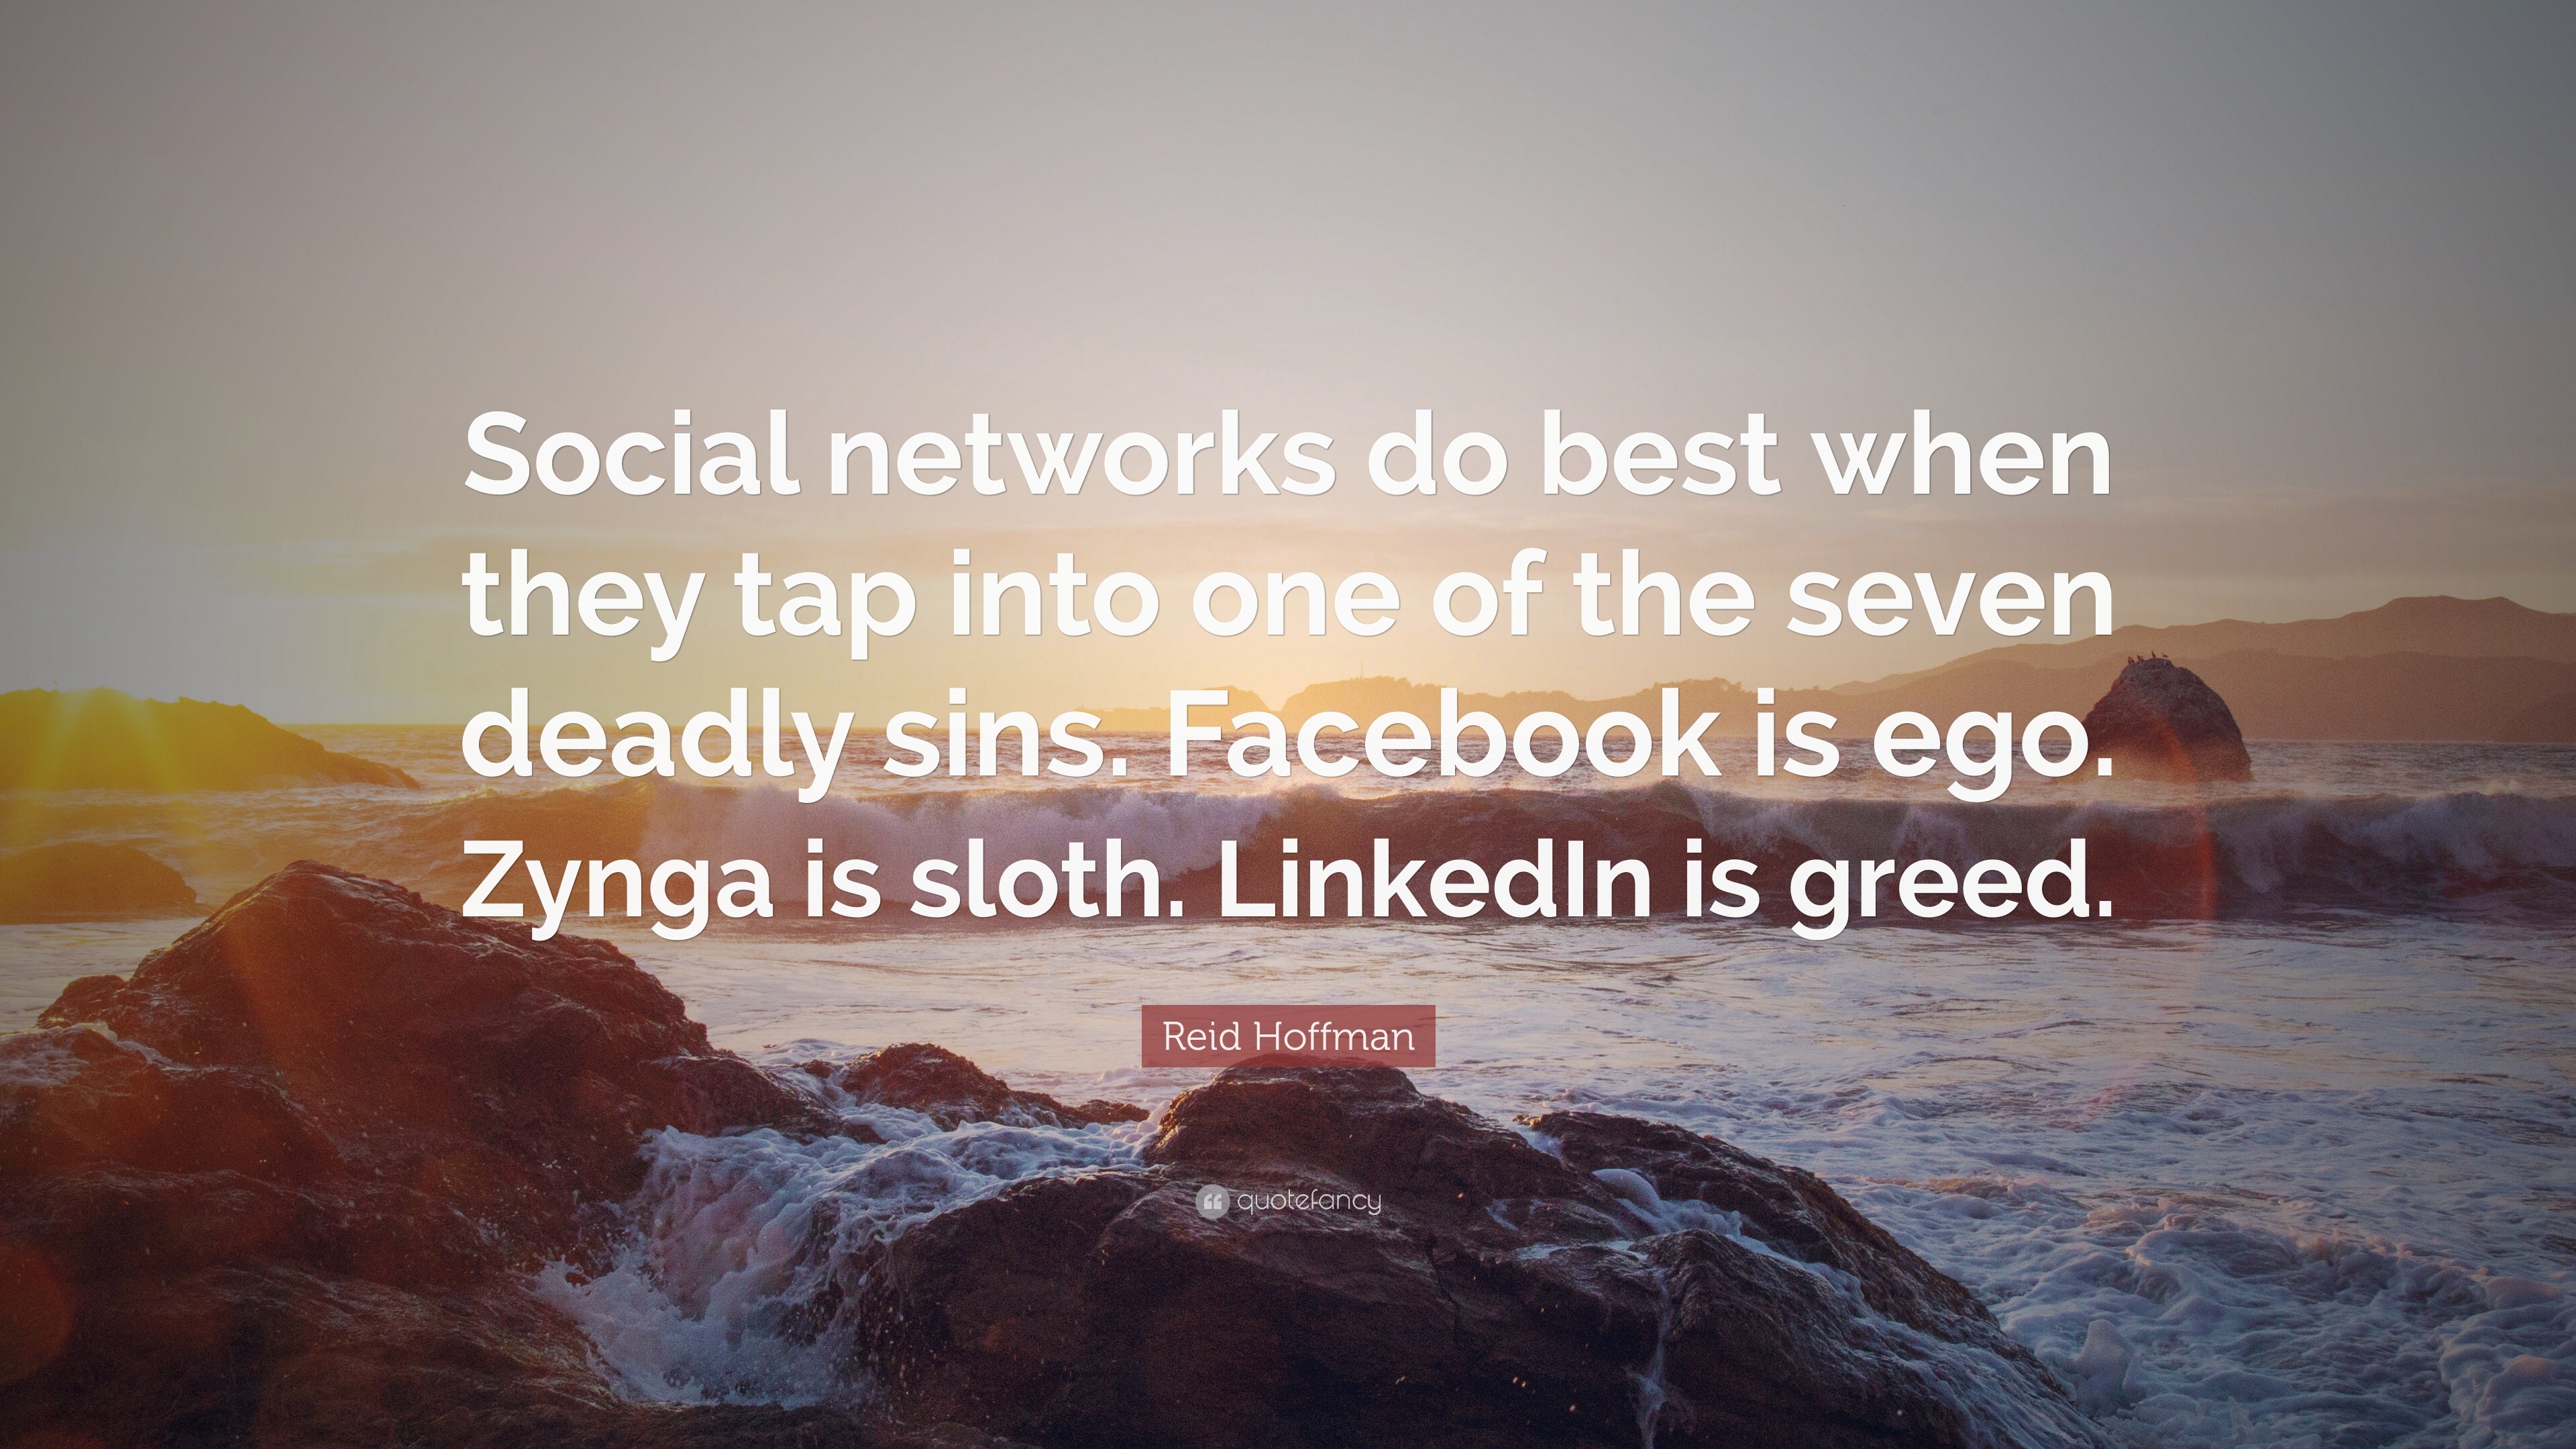 Reid Hoffman Quote: “Social networks do best when they tap into one of the  seven deadly sins. Facebook is ego. Zynga is sloth. LinkedIn is gr”